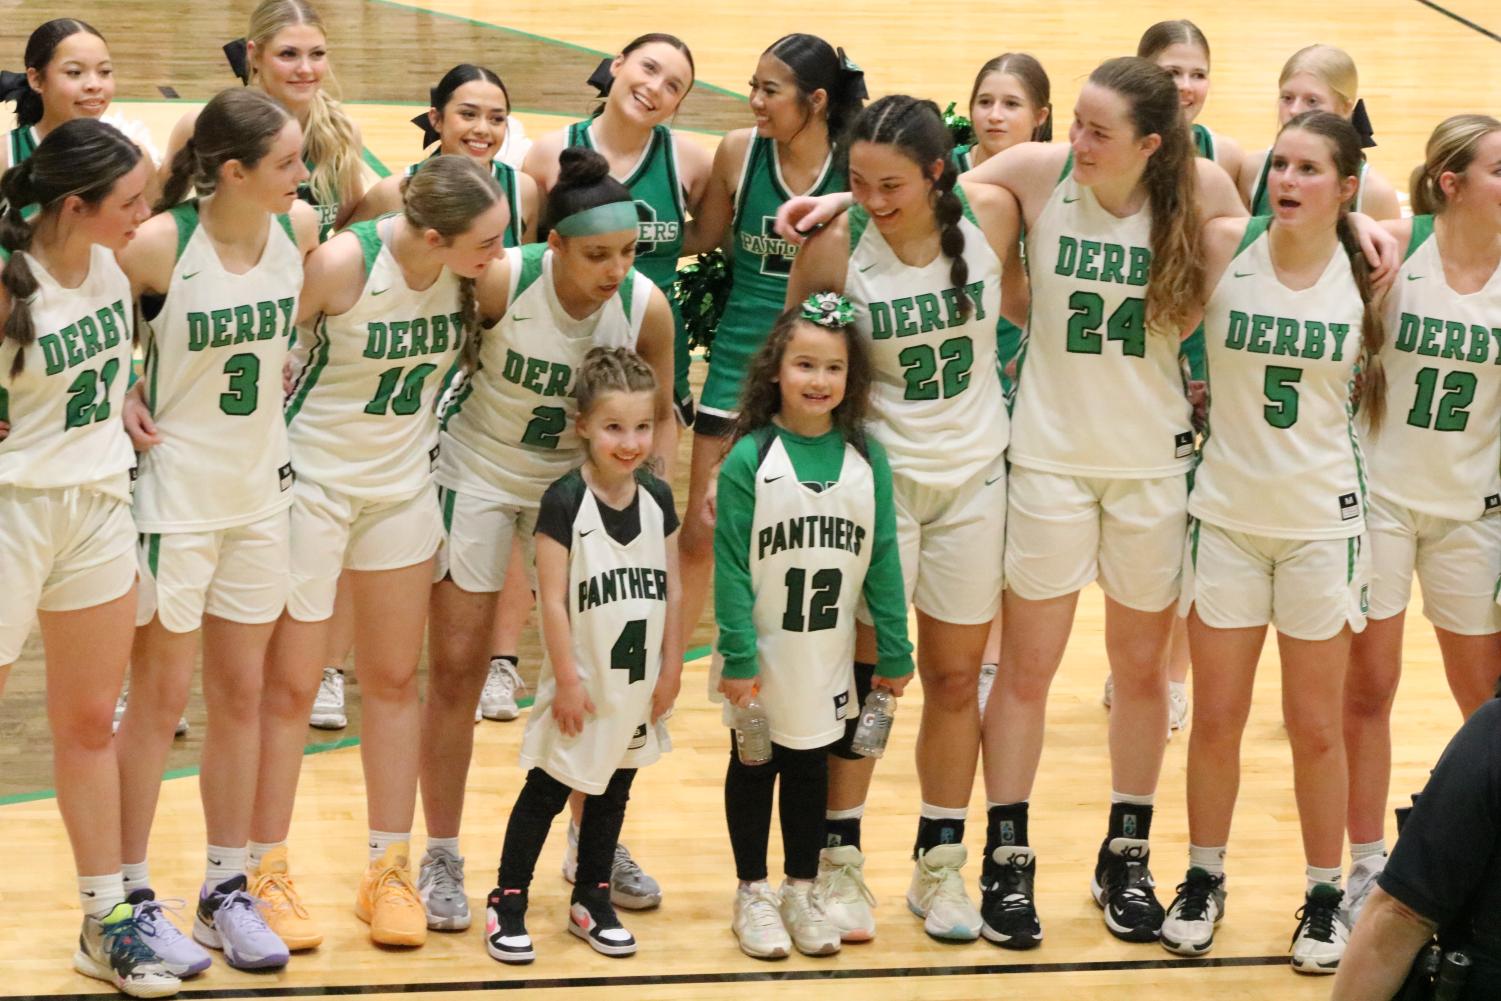 Girls+basketball+sub-state+semi+finals+V.+Lawrence+Free+State+%28Photos+by+Alexis+King%29